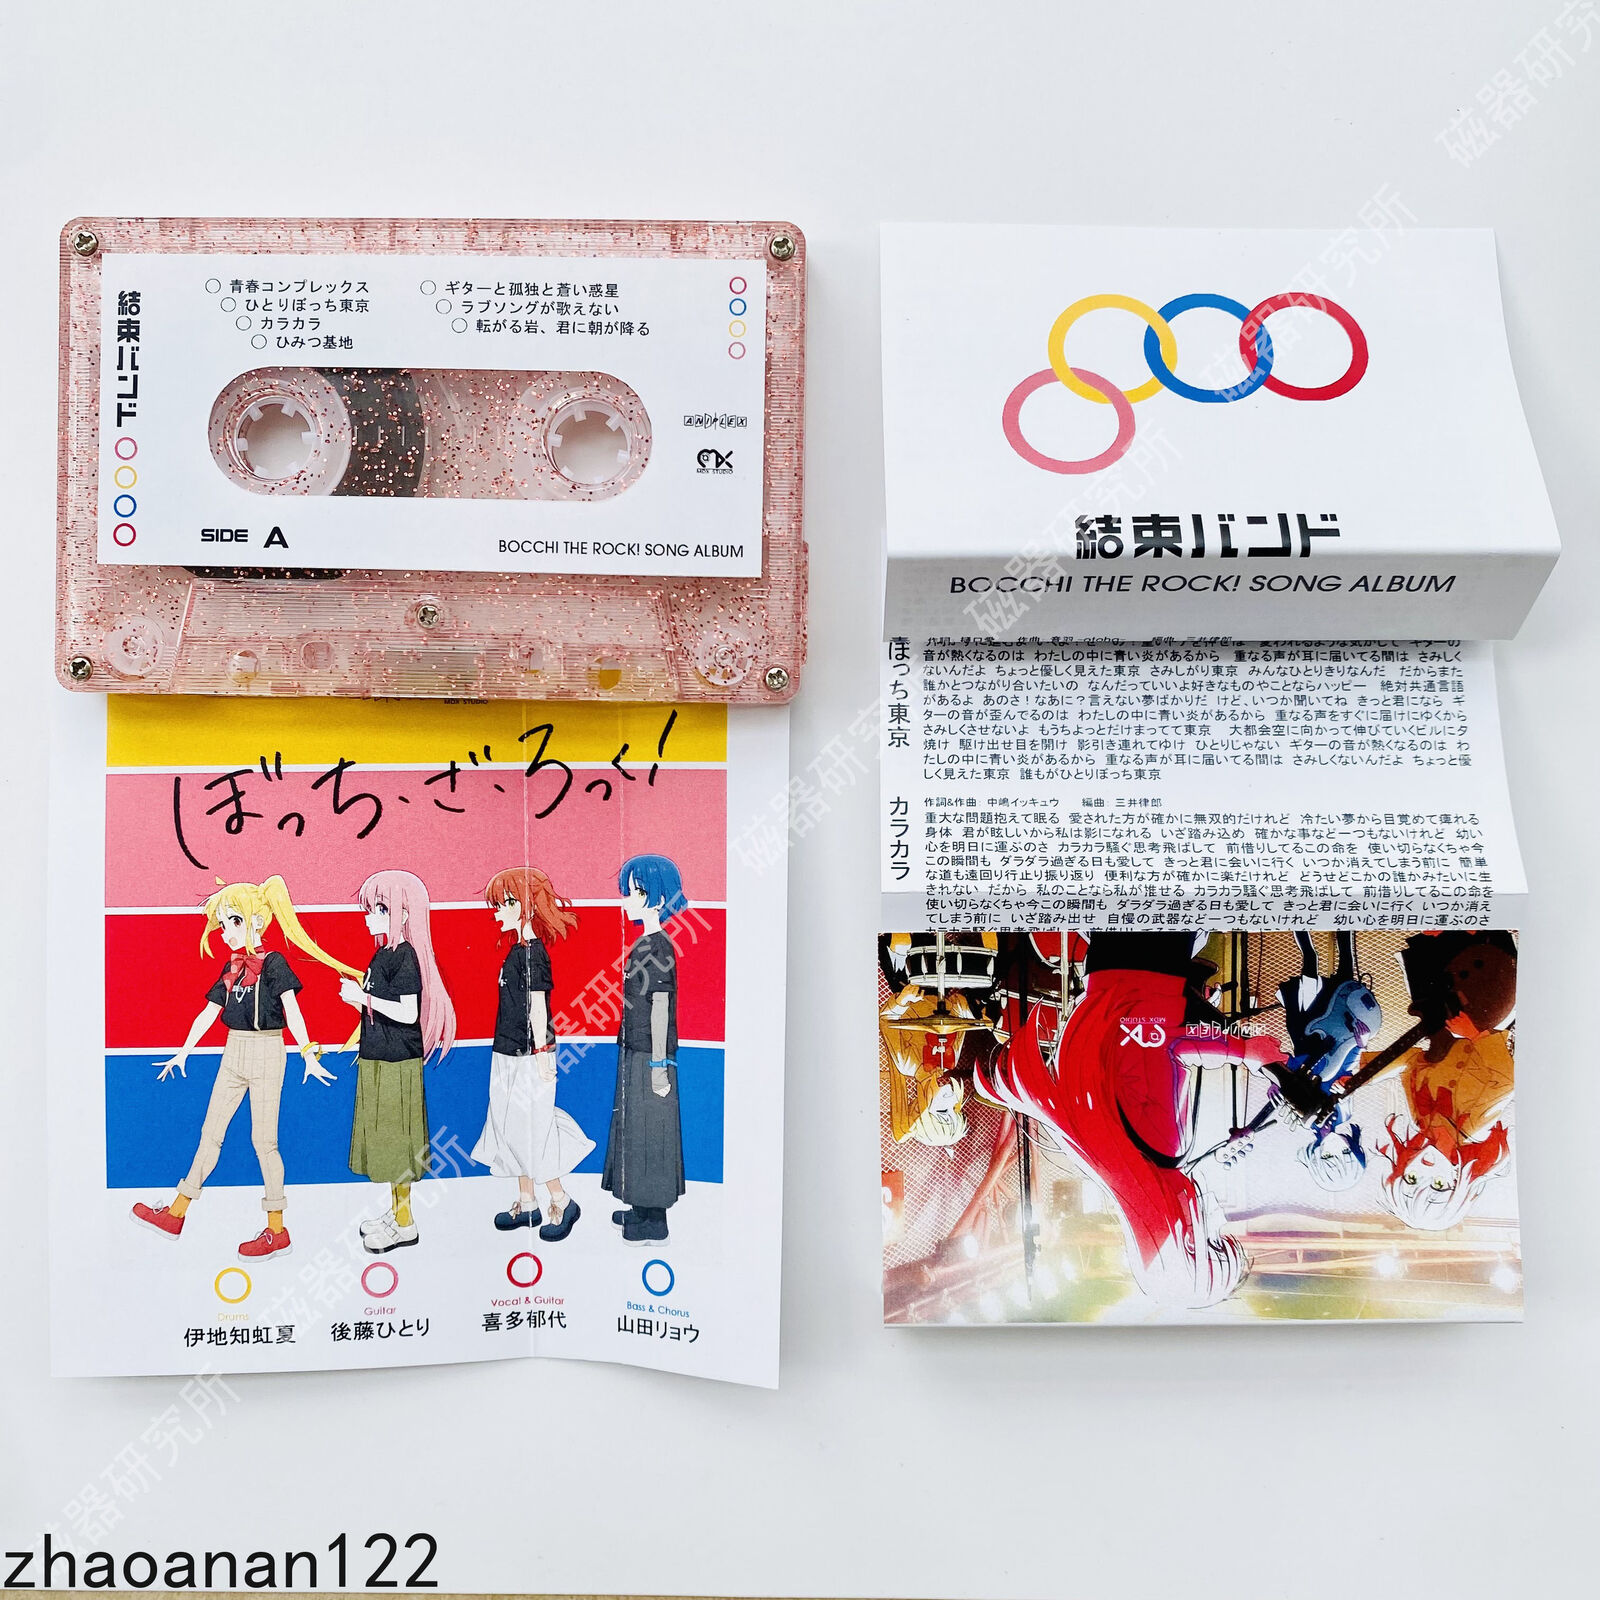 New Anime BOCCHI THE ROCK Soundtrack Tapes Albums Memorabilia Gift Collection